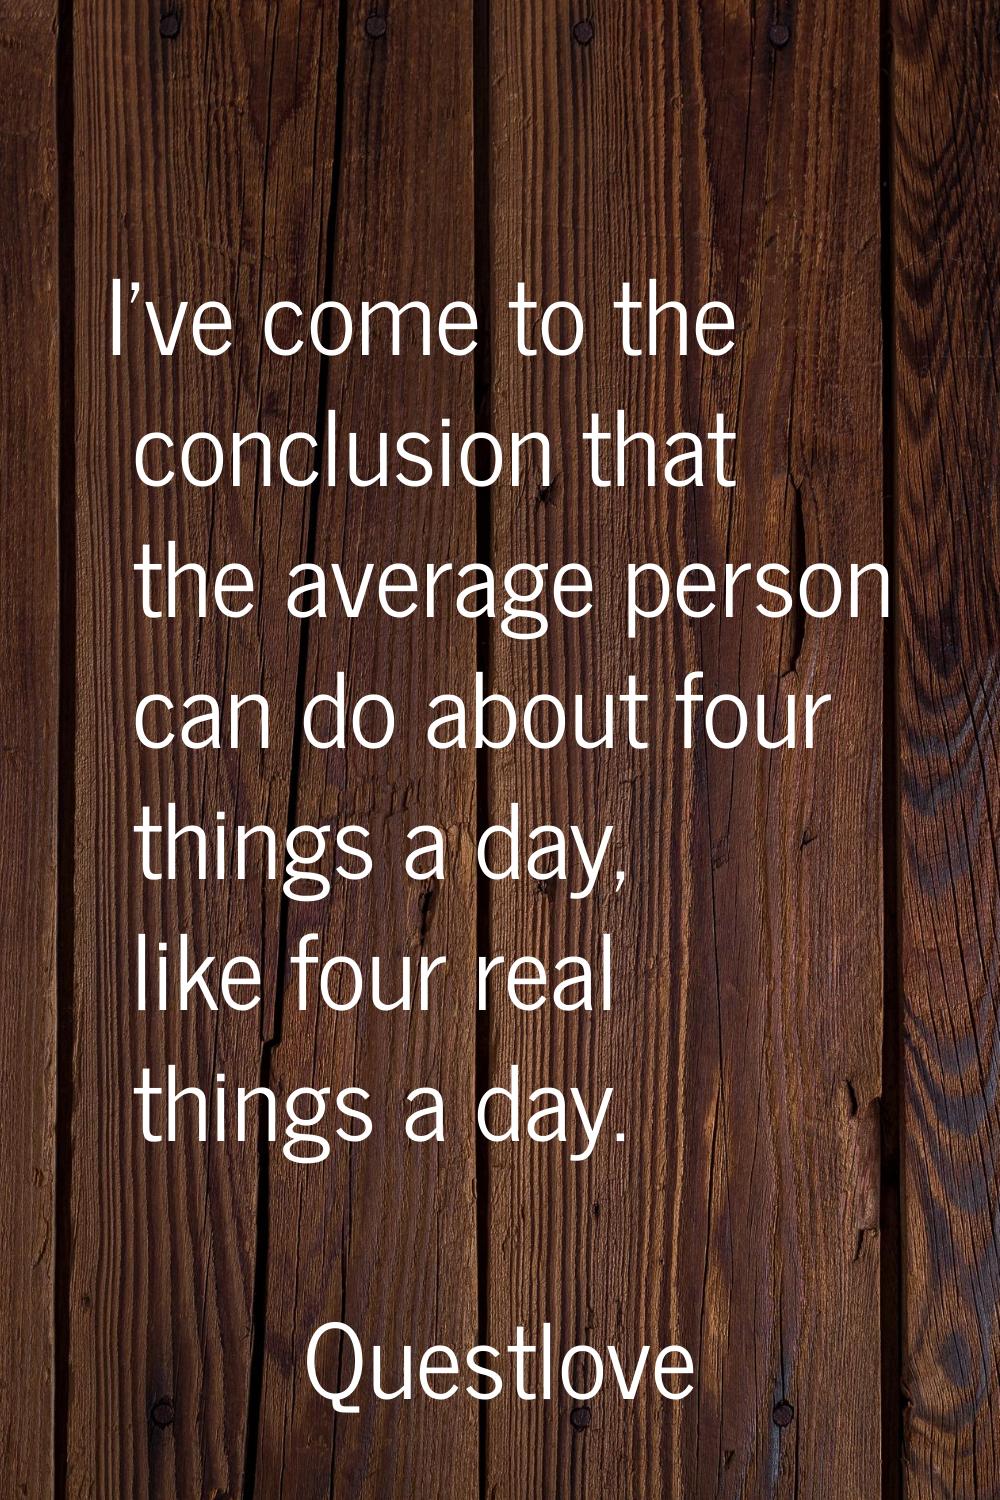 I've come to the conclusion that the average person can do about four things a day, like four real 